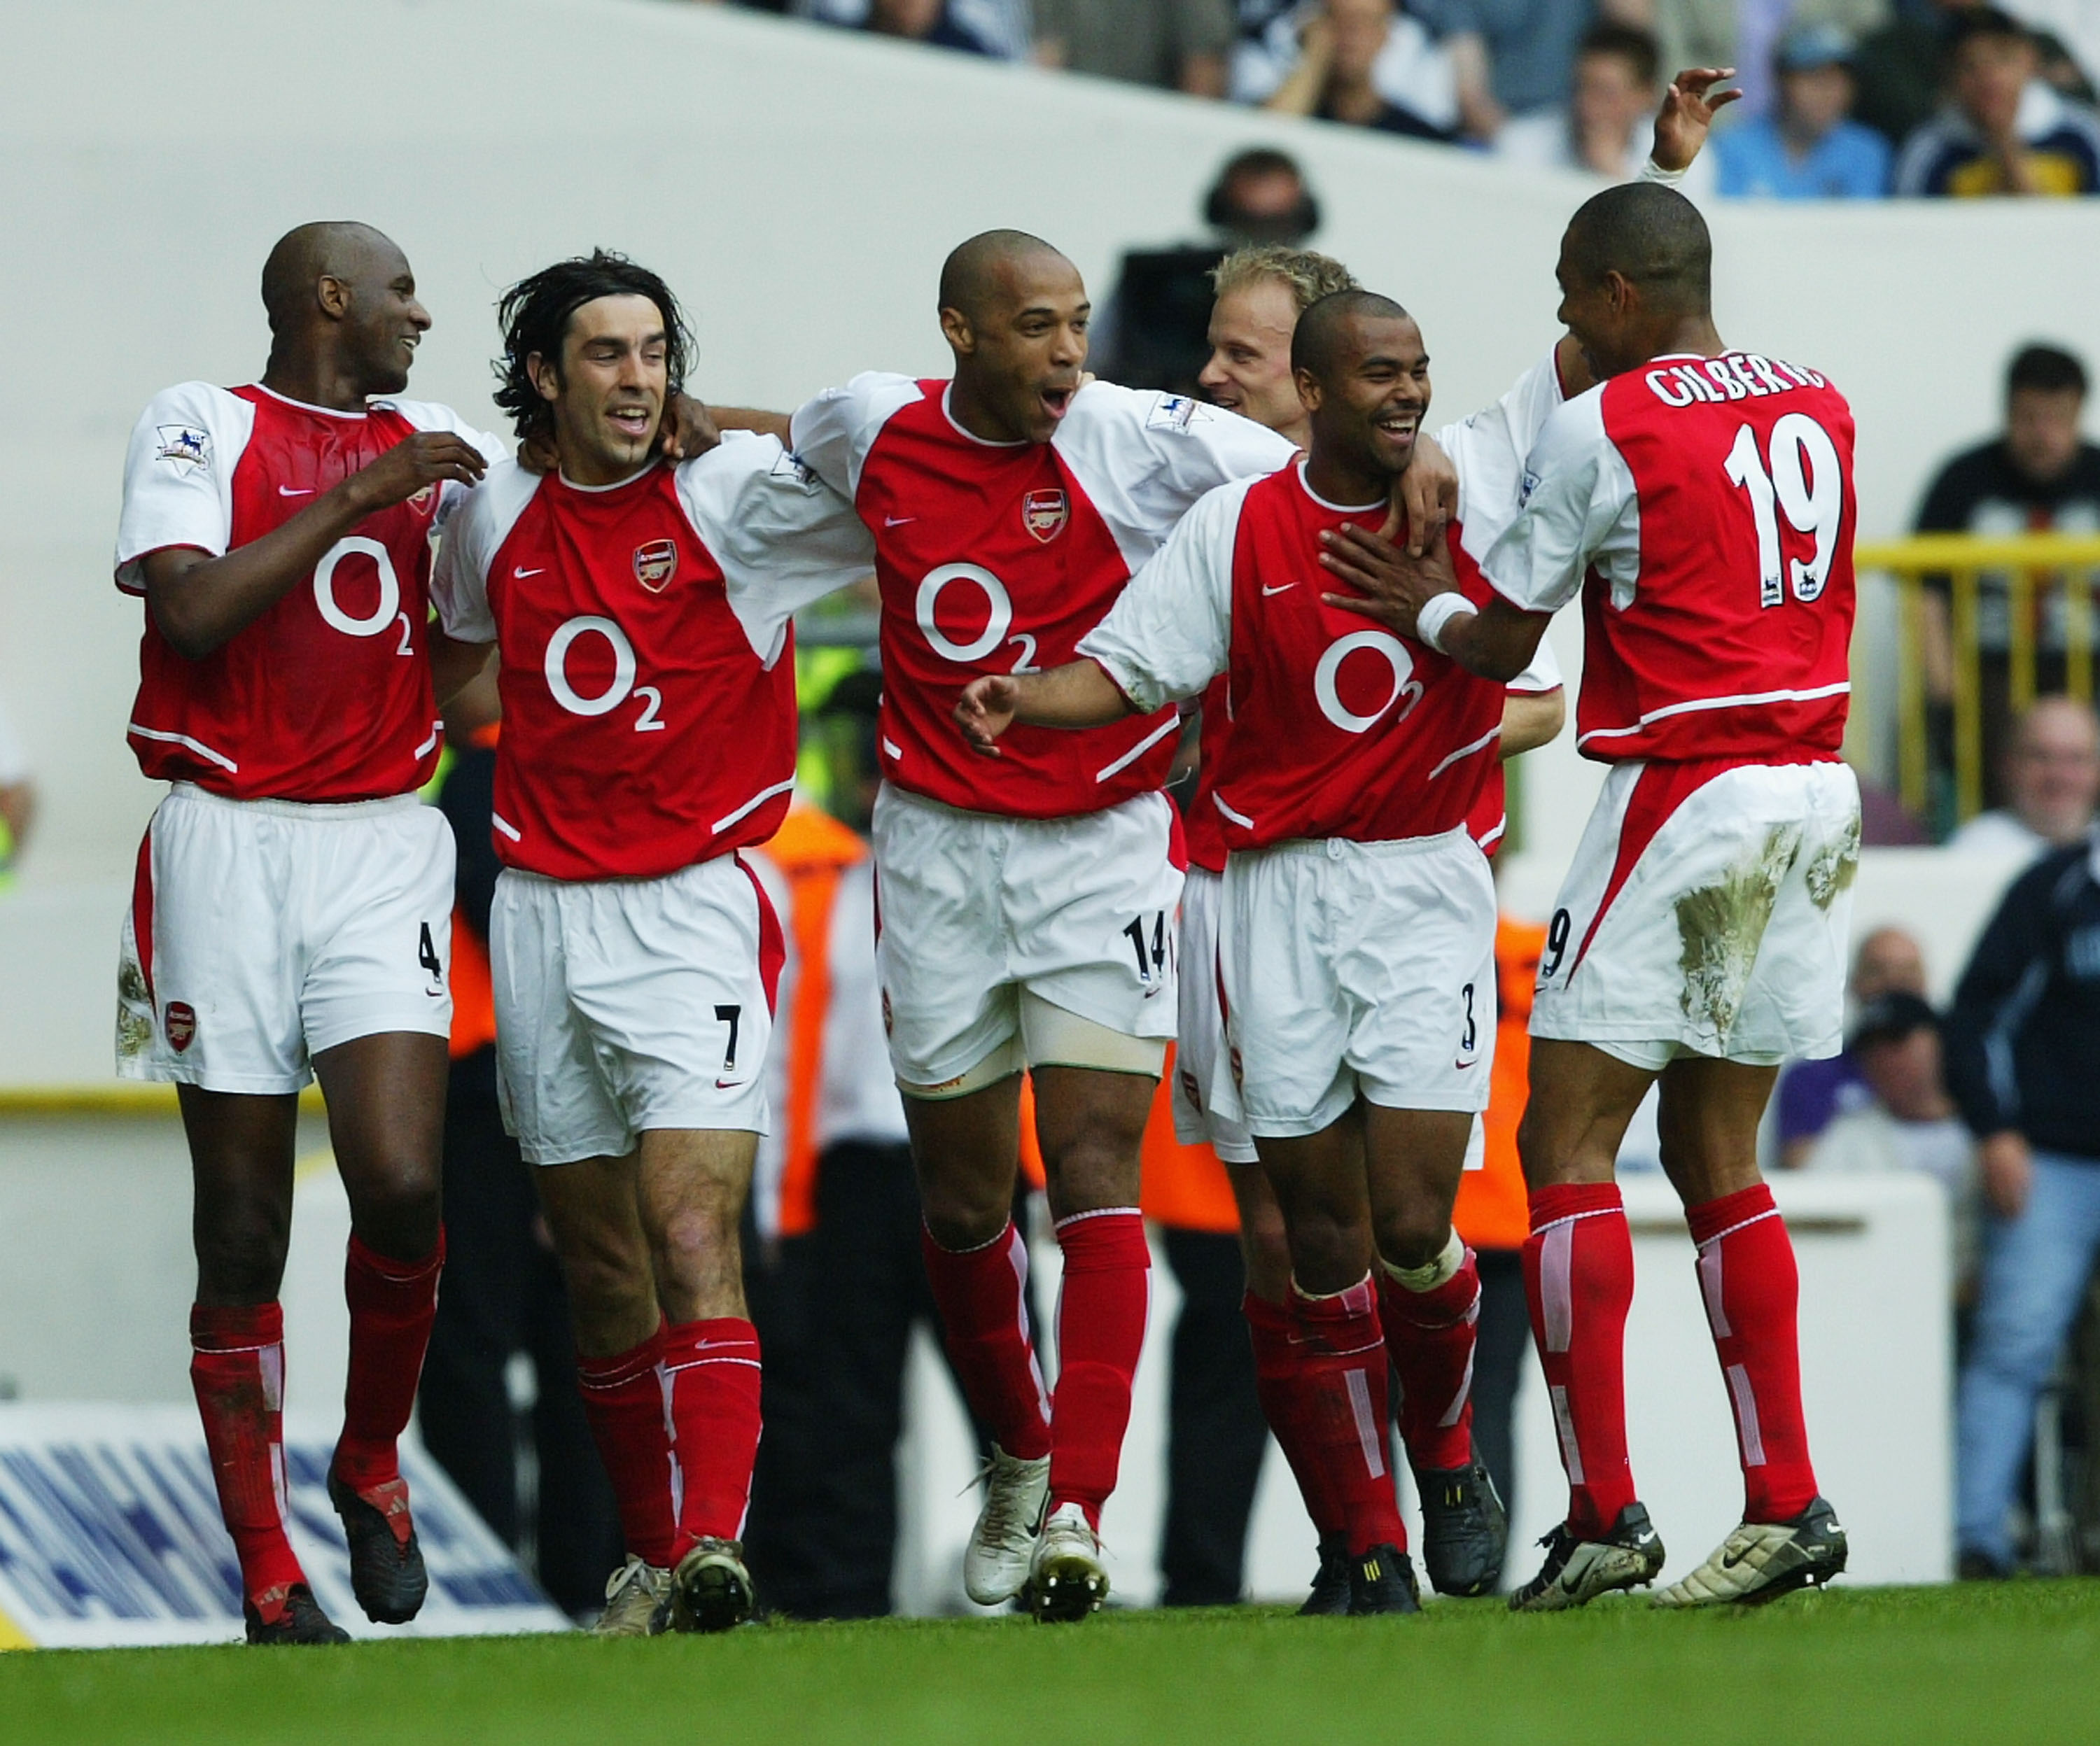 LONDON - APRIL 25: Patrick Vieira, Robert Pires, Thierry Henry, Ashley Cole and Gilberto Silva of Arsenal celebrate after the second goal during the FA Barclaycard Premiership match between Tottenham Hotspur and Arsenal at White Hart Lane on April 25, 200